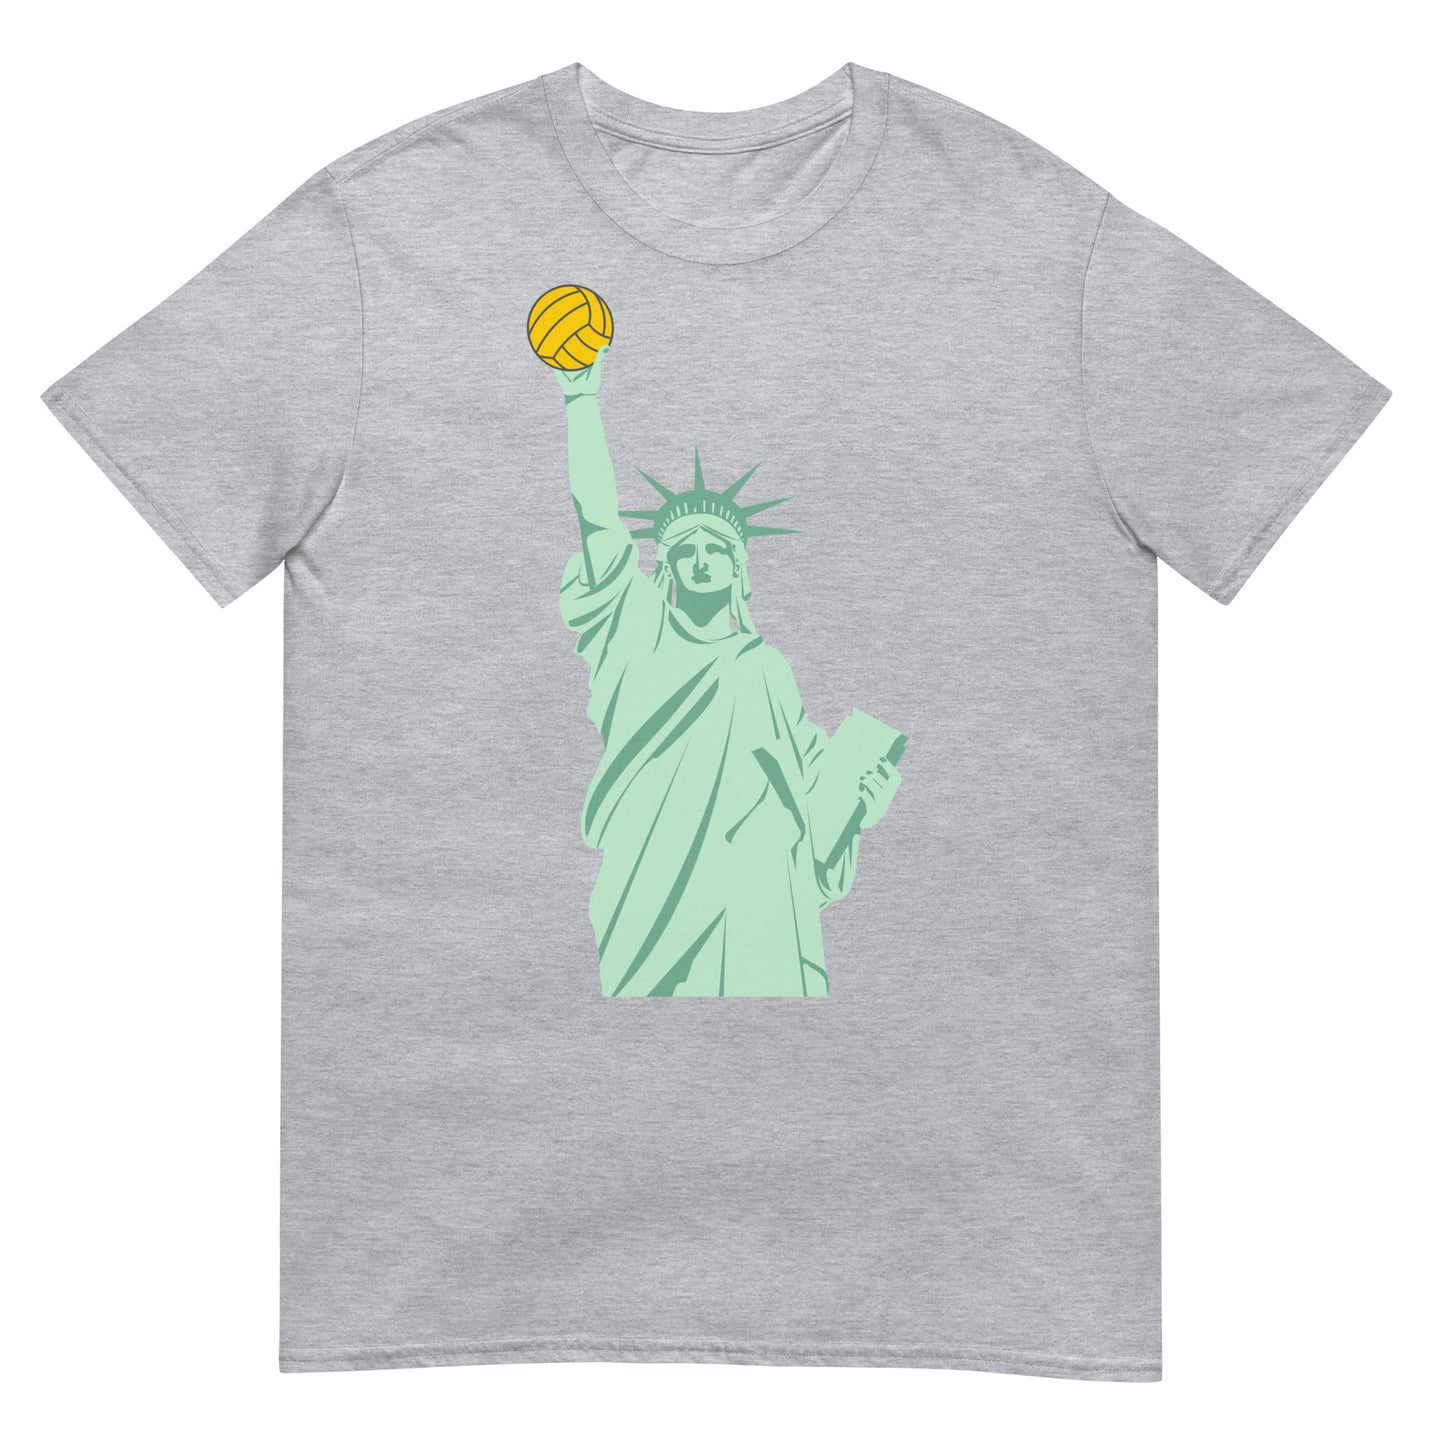 Statue of Liberty Water Polo Short-Sleeve Unisex T-Shirt